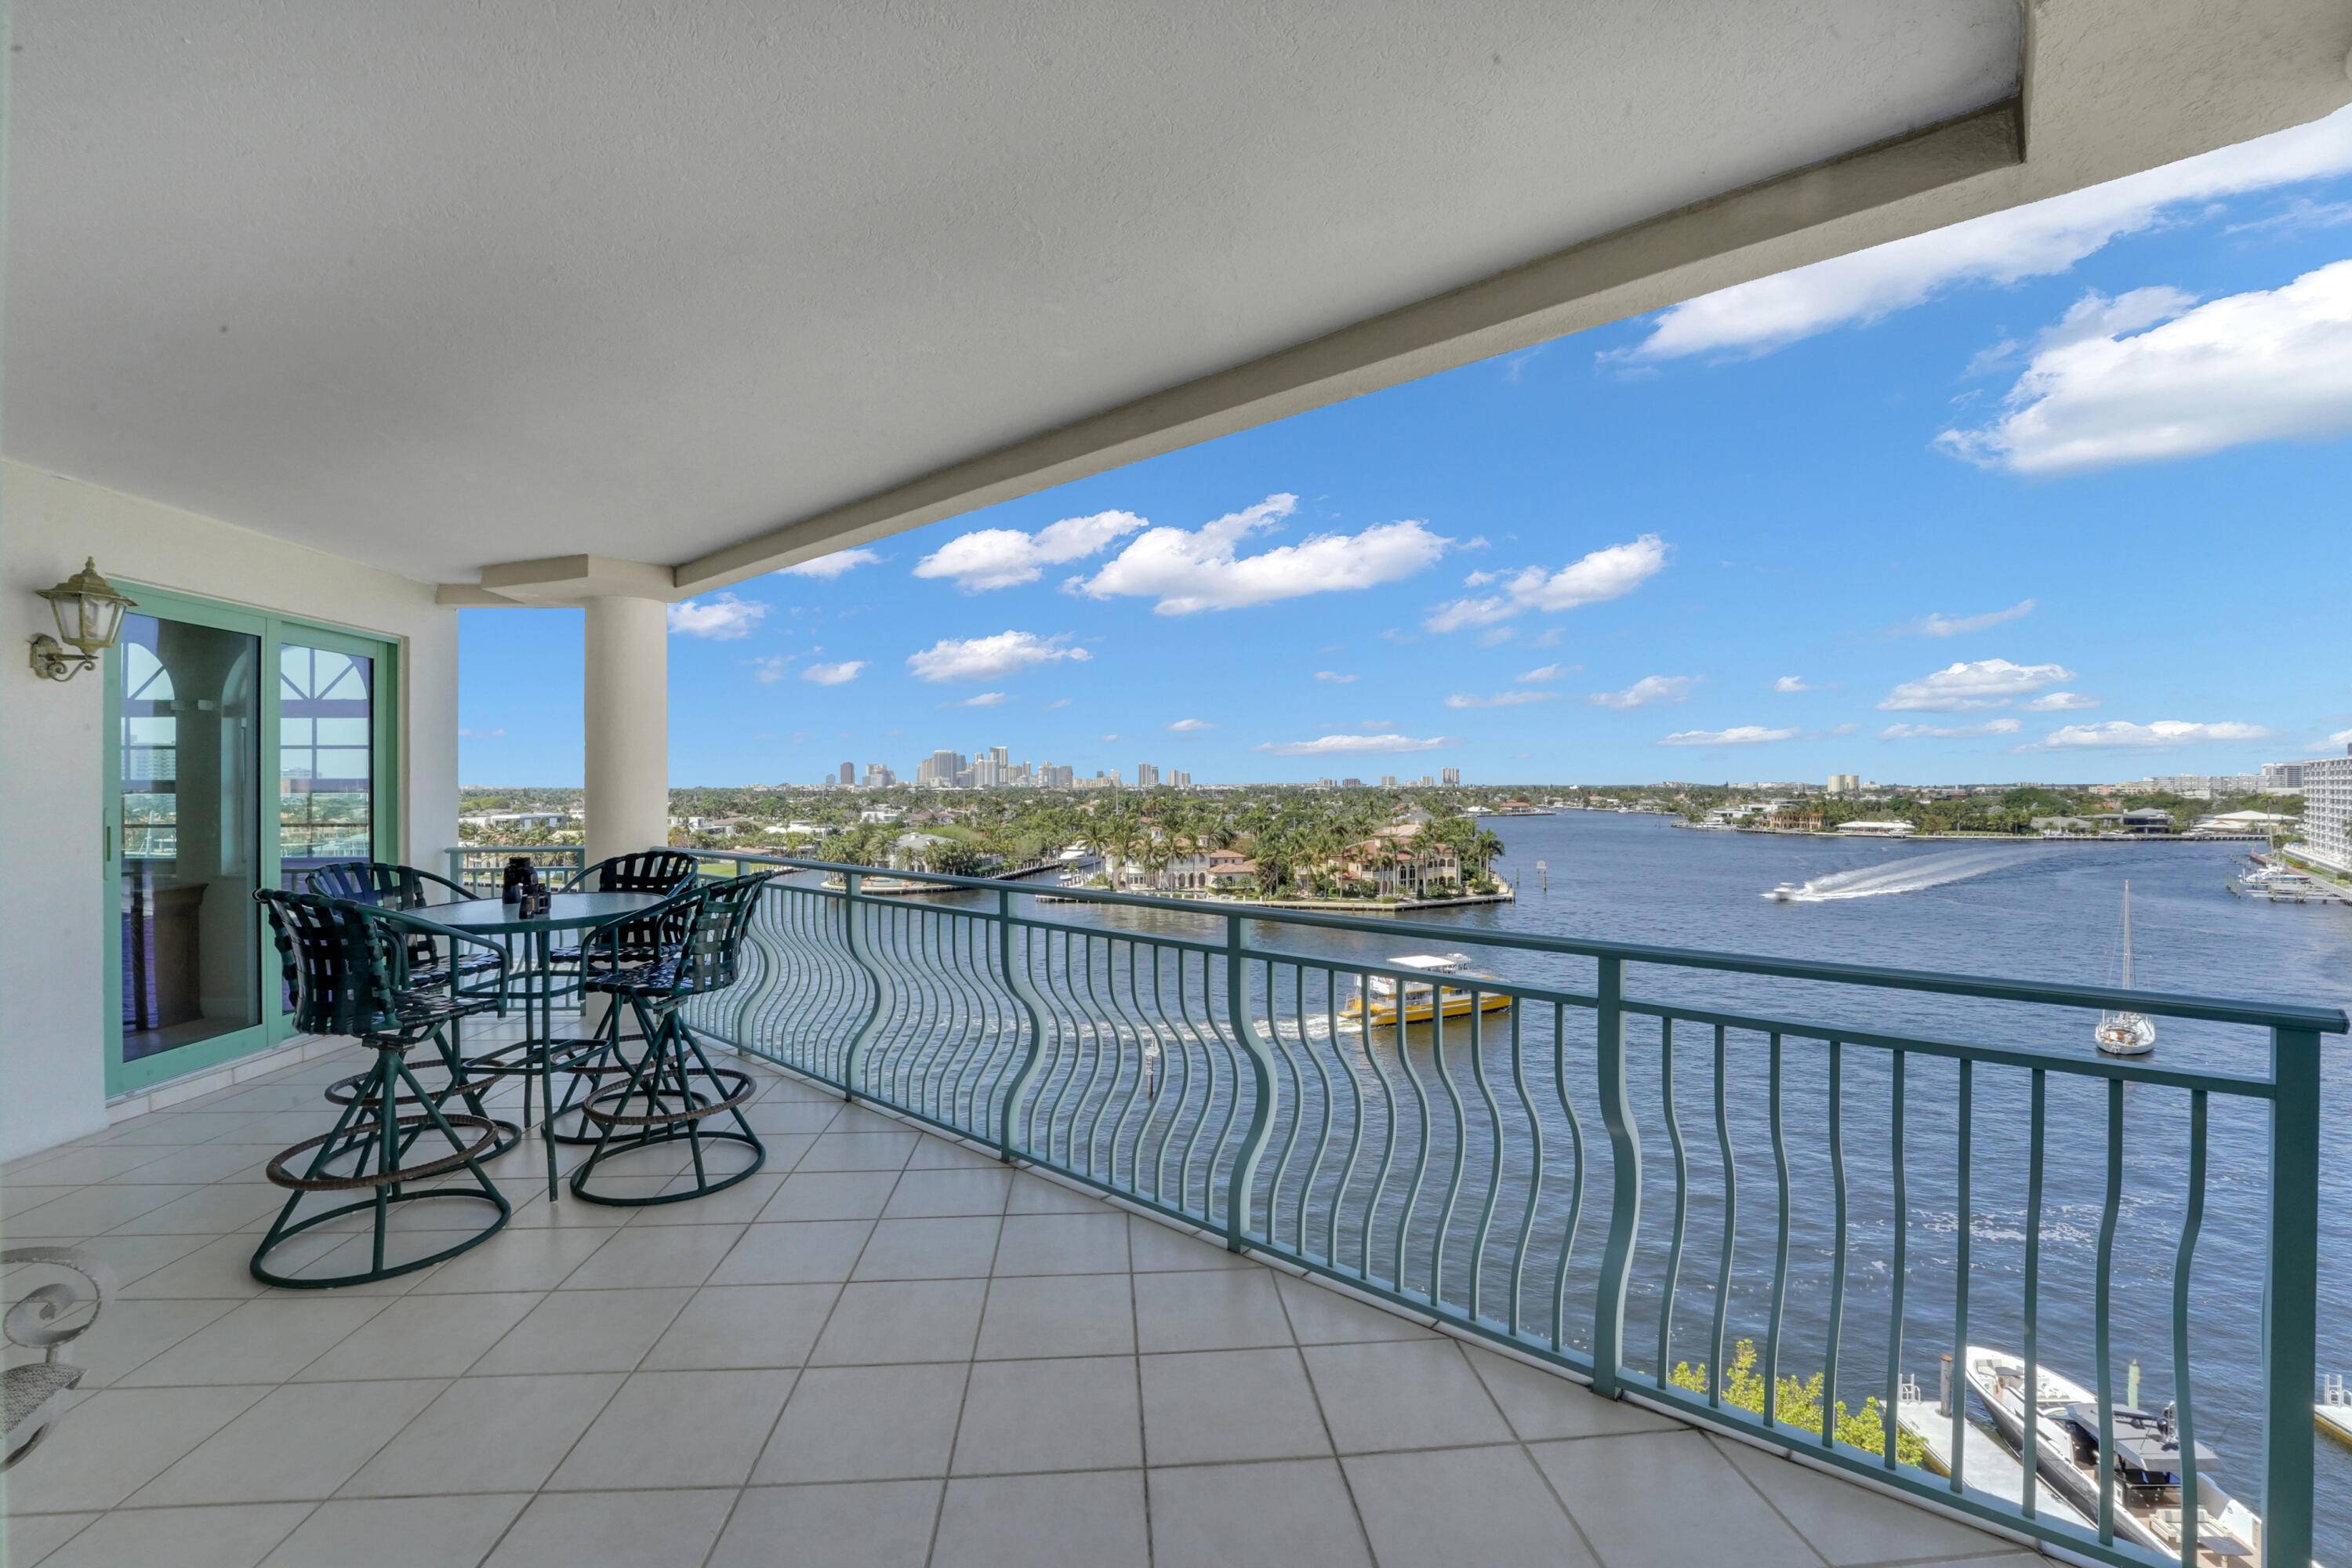 Water Views as far as the eye can see from every room of this extra large 3300 sq.